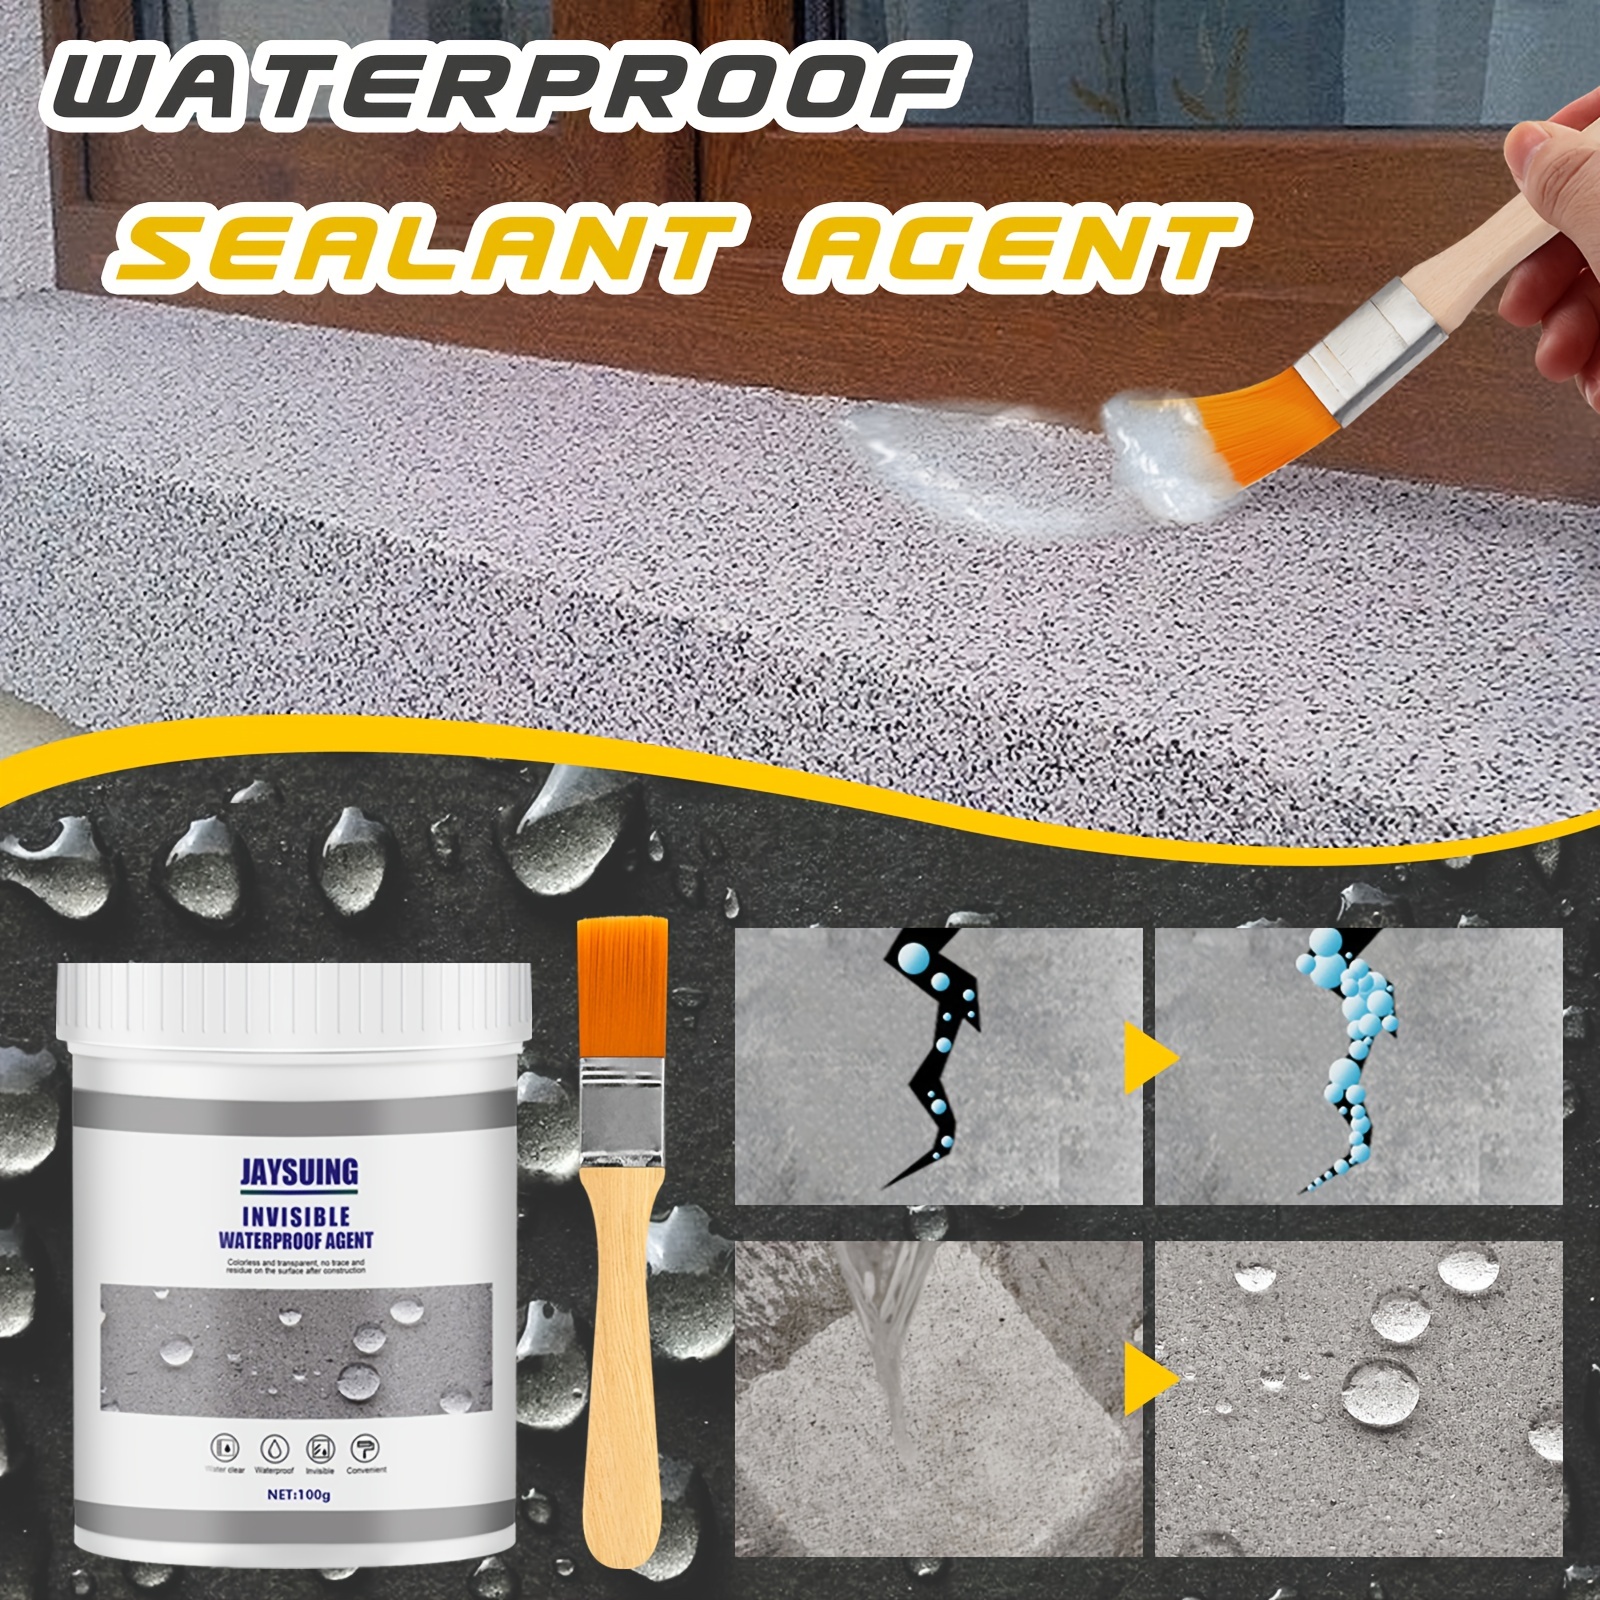 Waterproof Insulating Sealant, Invisible Waterproof Agent, Super